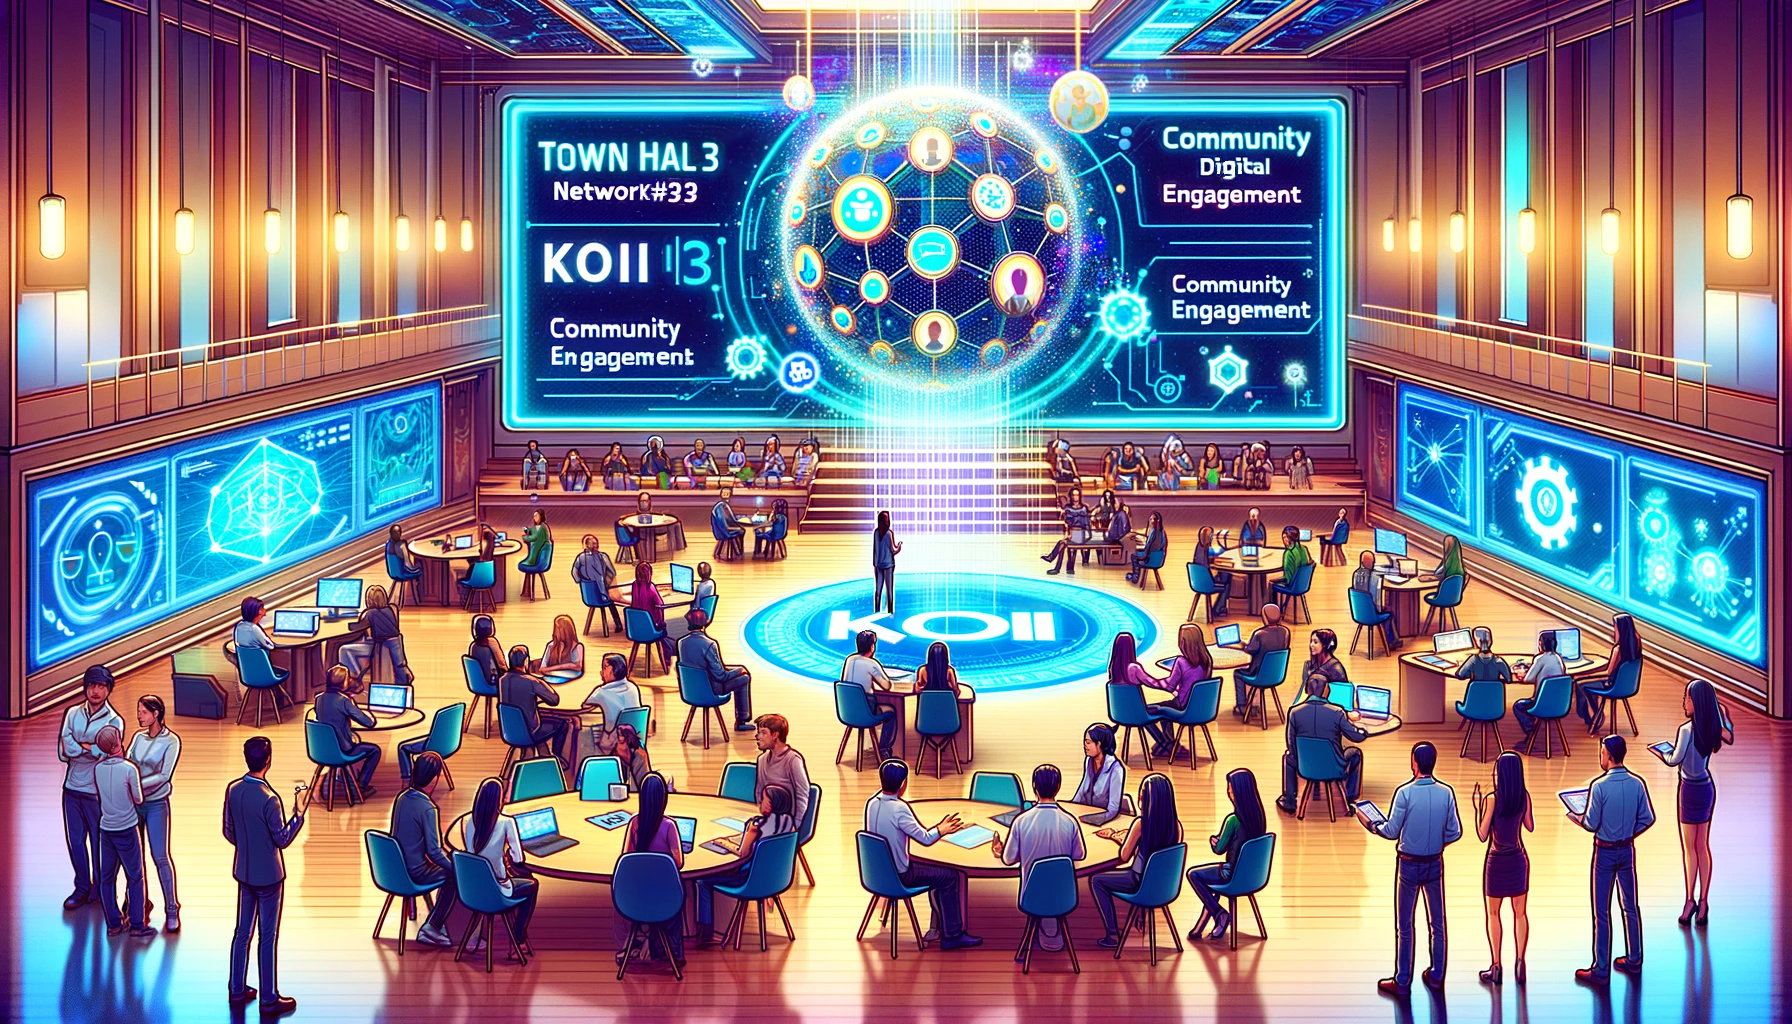 Koii Network Town Hall #3: A Beacon for Community Engagement